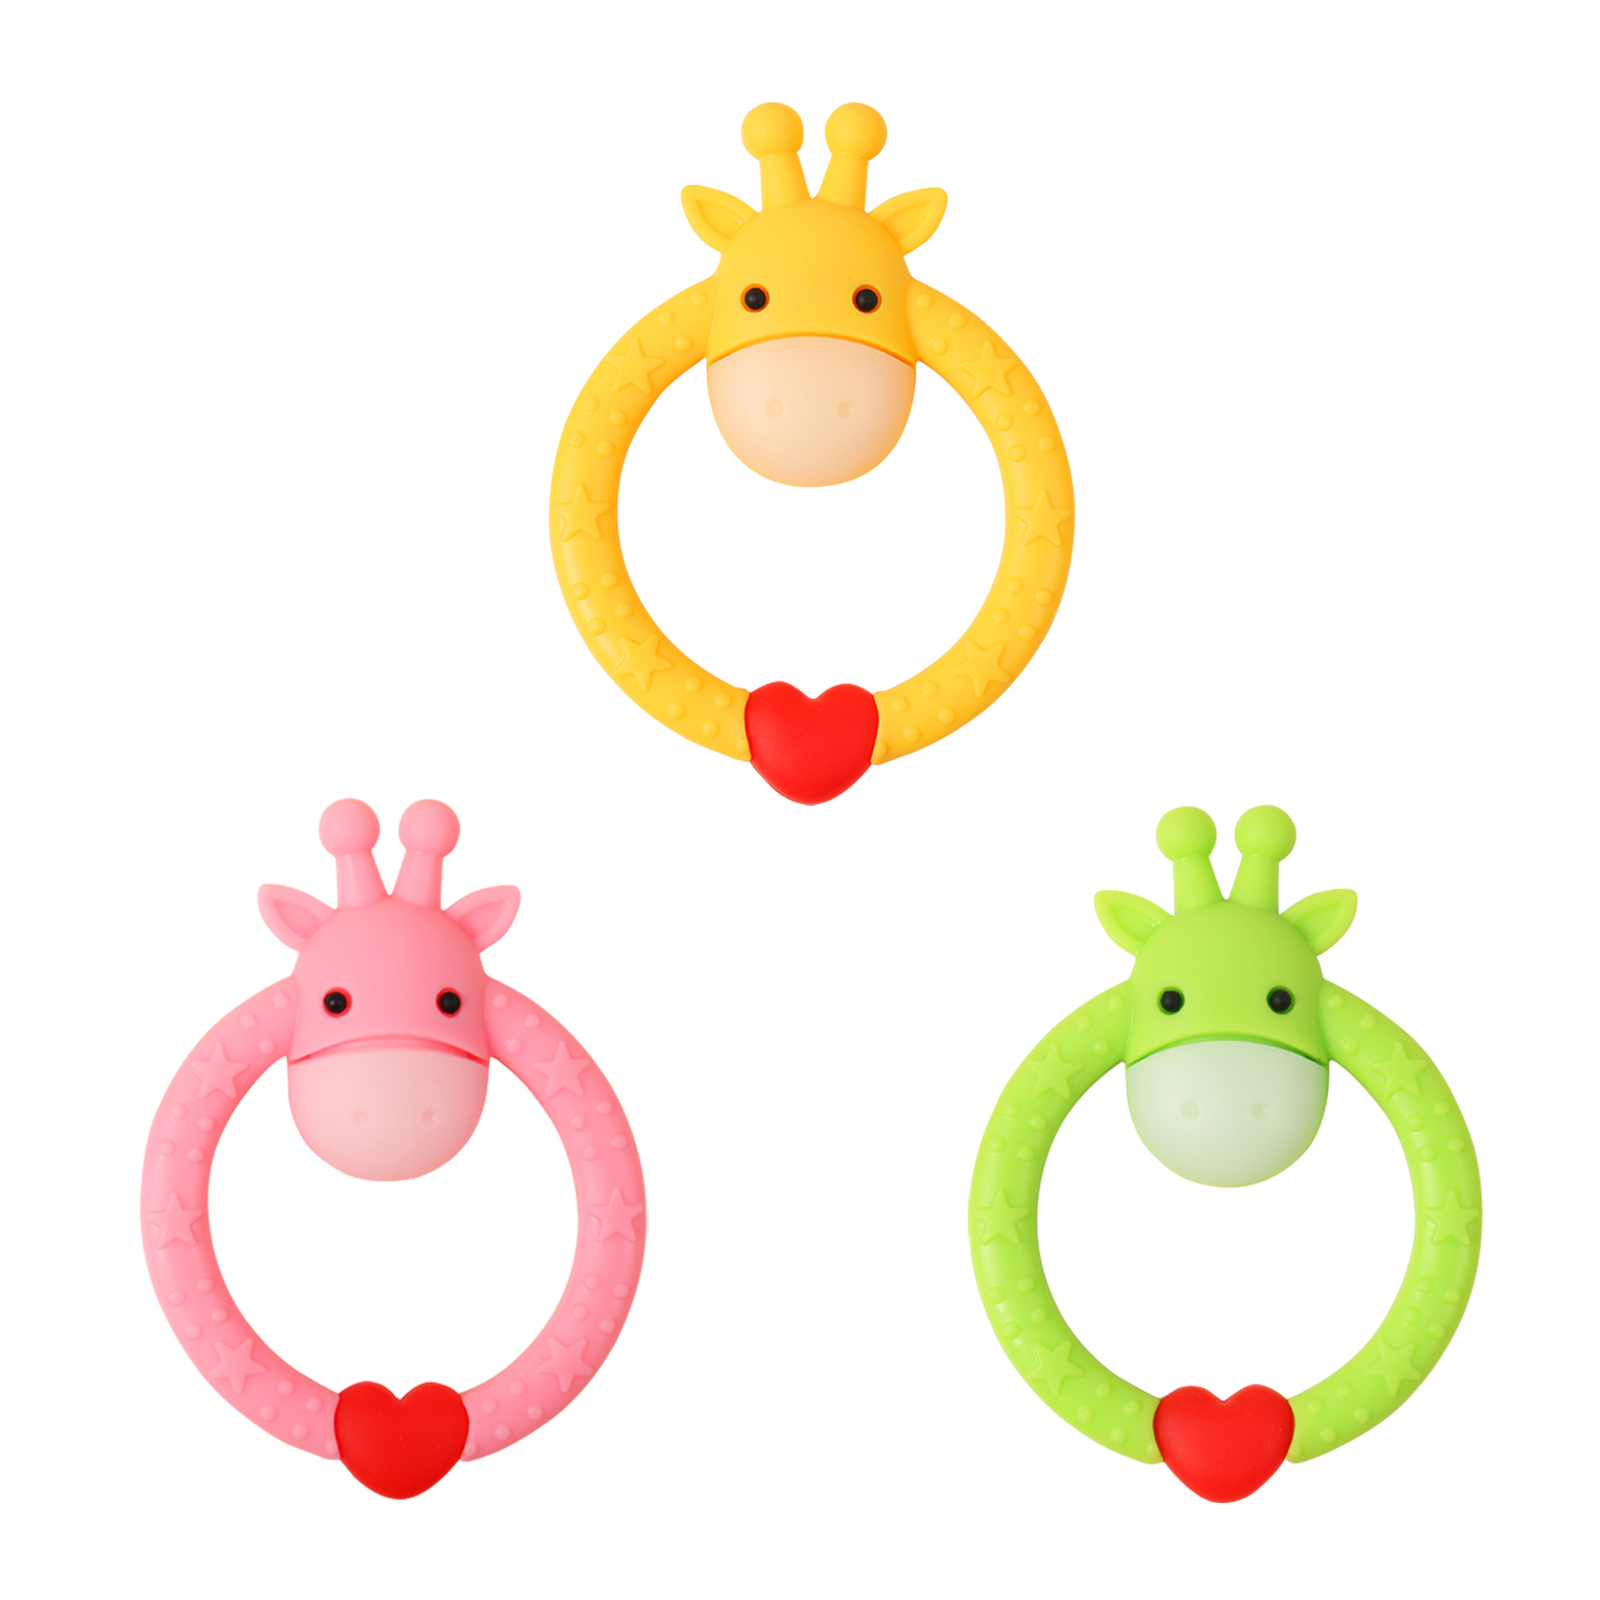 Innovative Baby Teether Ring Toy for Teething Relief 1 1